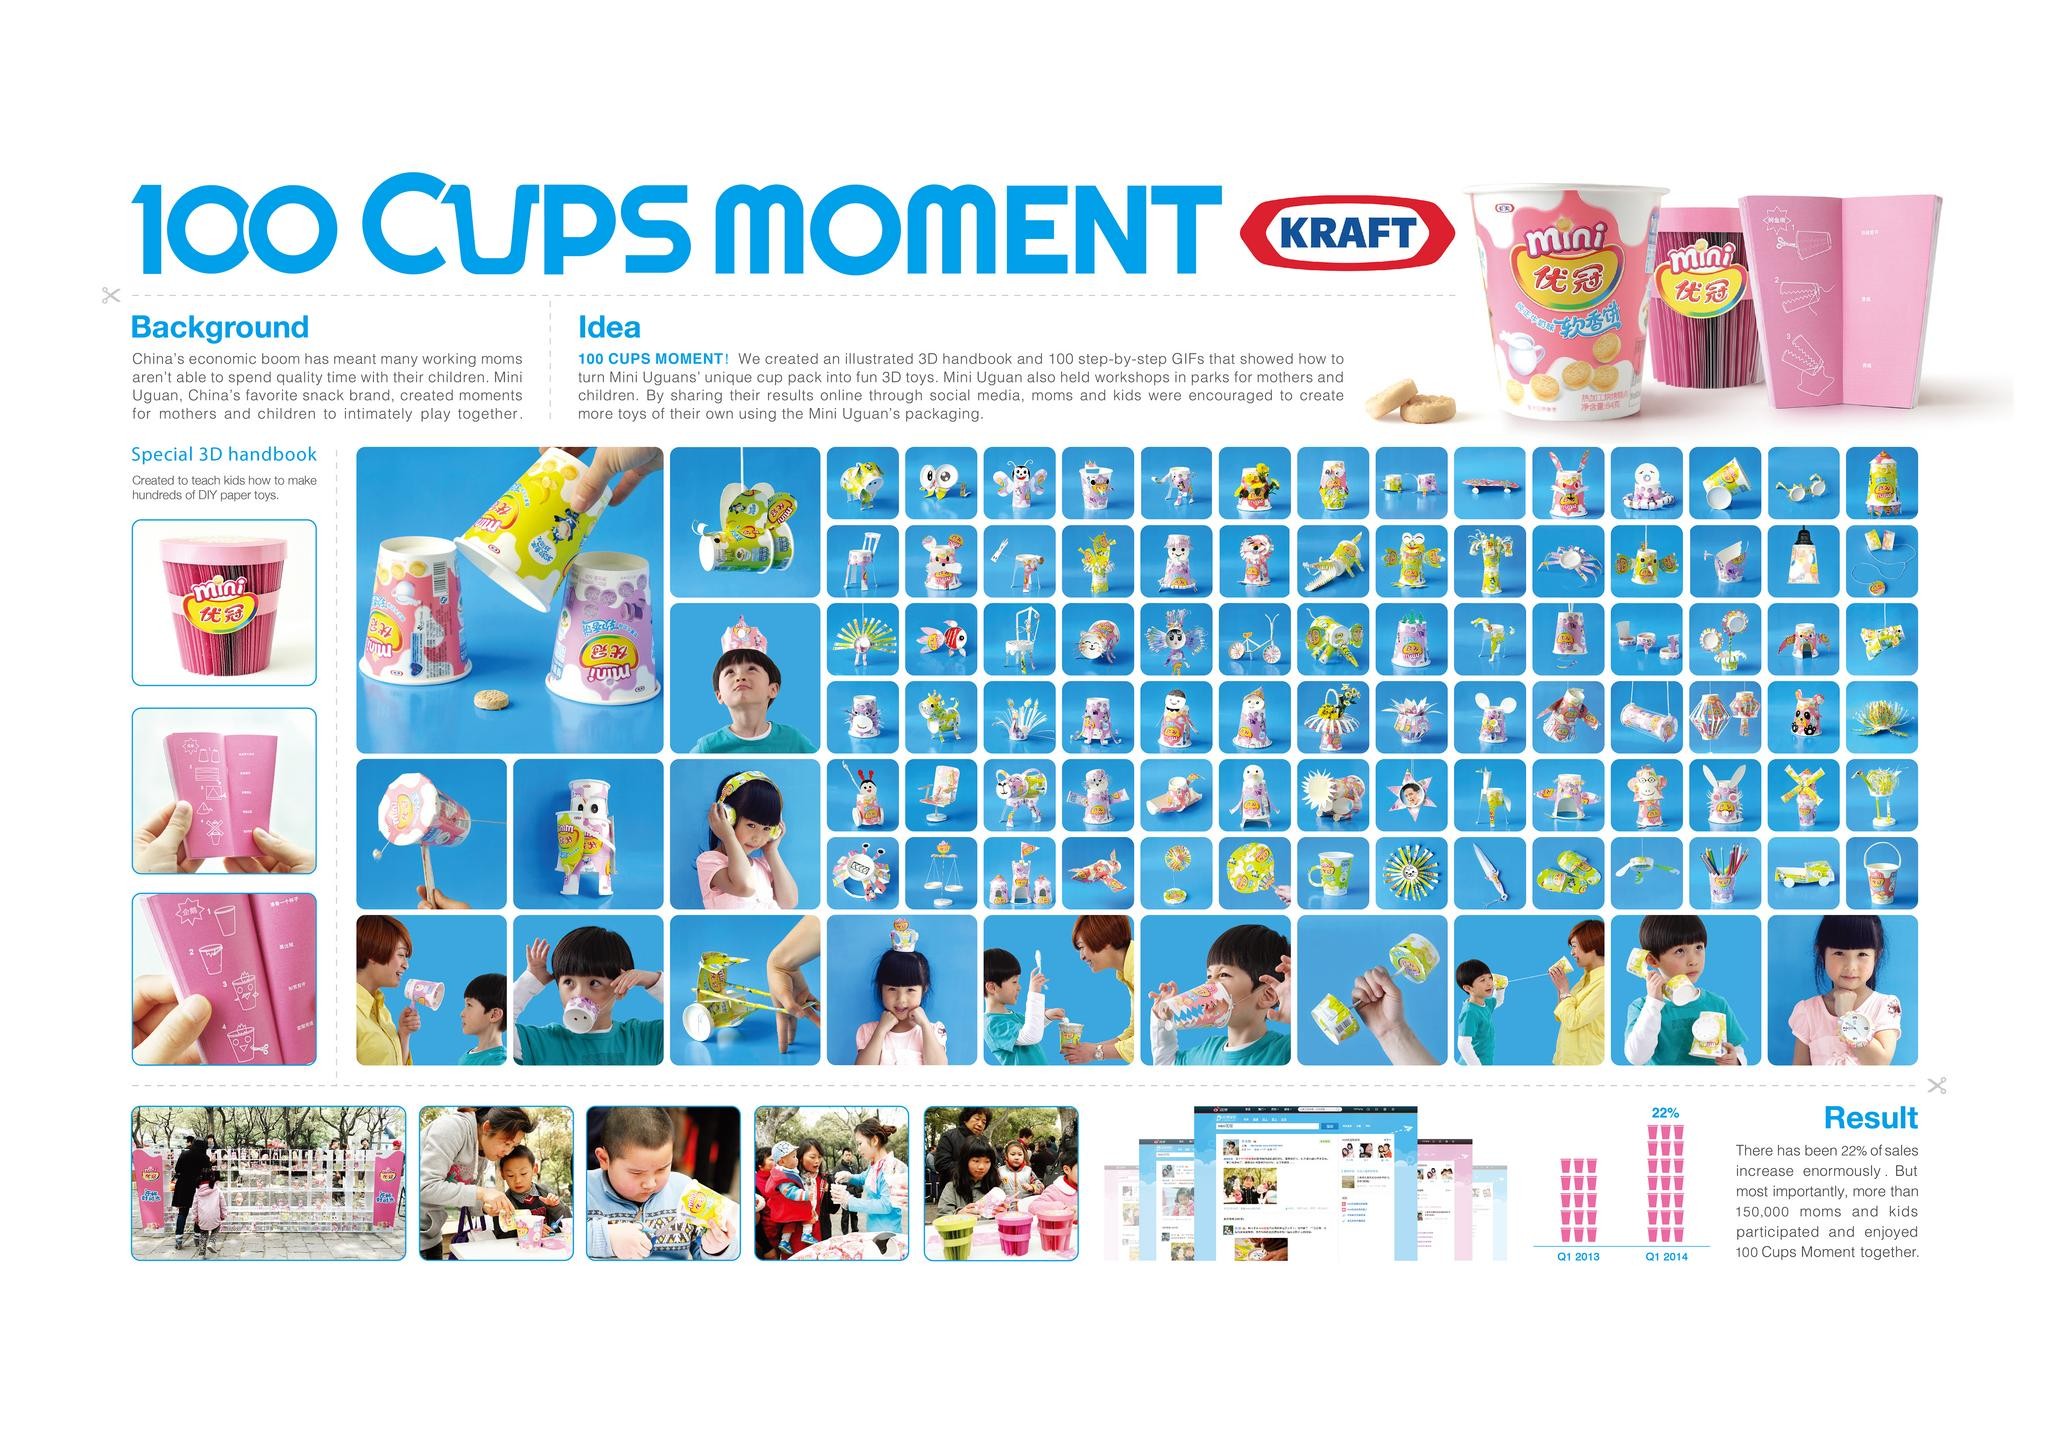 100 CUPS MOMENT